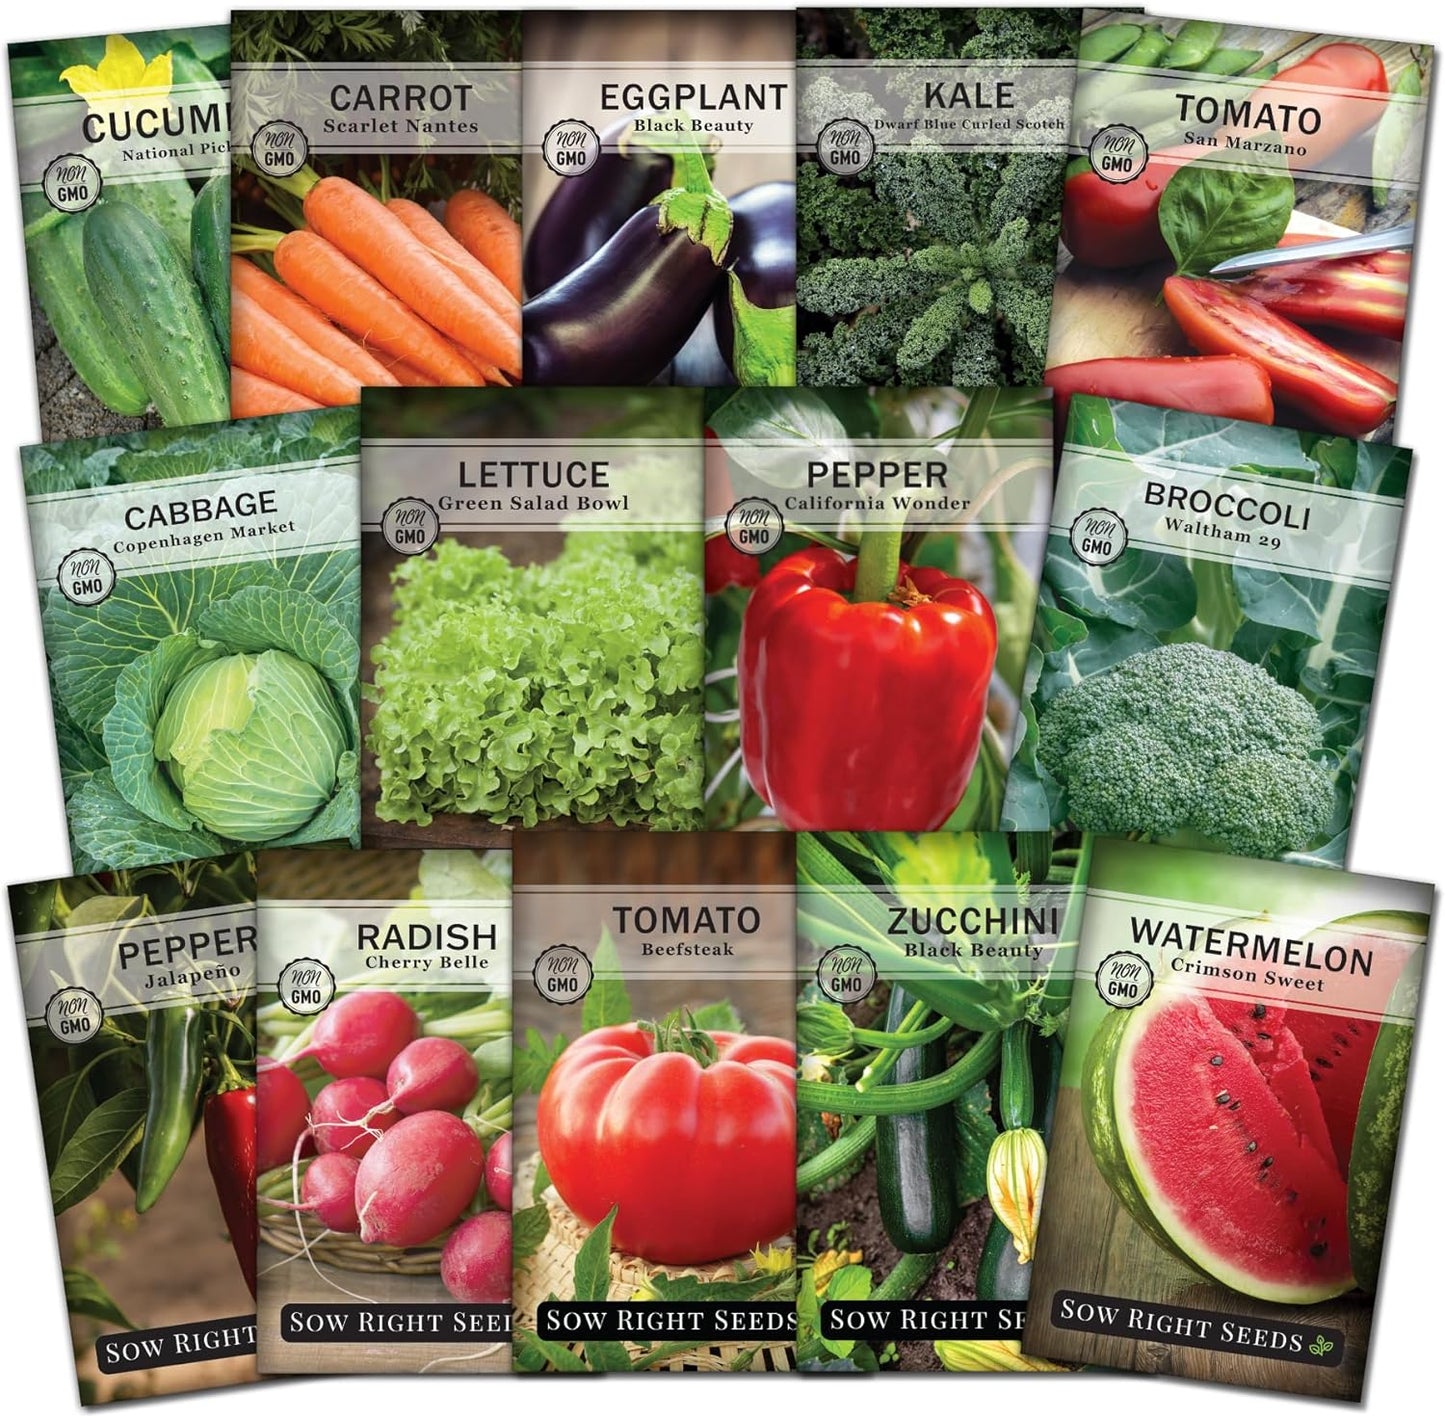 - Classic Vegetable Garden Seed Collection for Planting - Non-Gmo Heirloom Broccoli, Cabbage, Carrot, Cucumber, Eggplant, Kale, Lettuce, Tomato, Peppers, Zucchini, and More